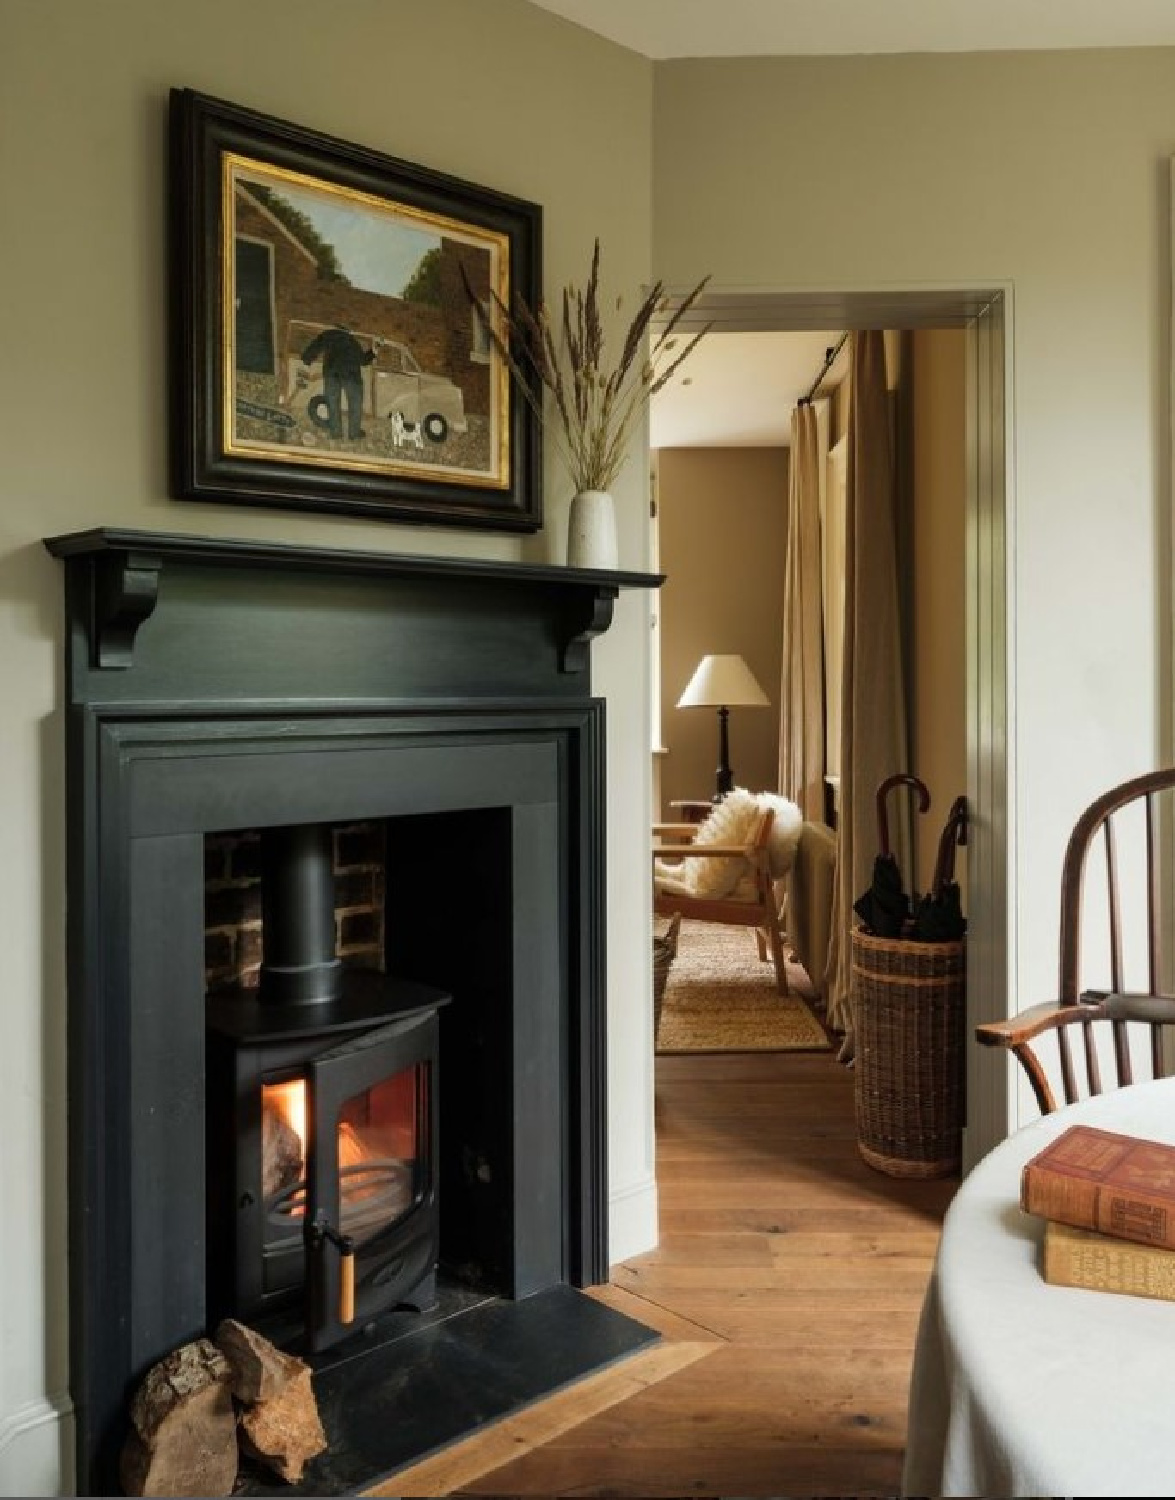 Heckfield Place - black fireplace surround in a cozy room.